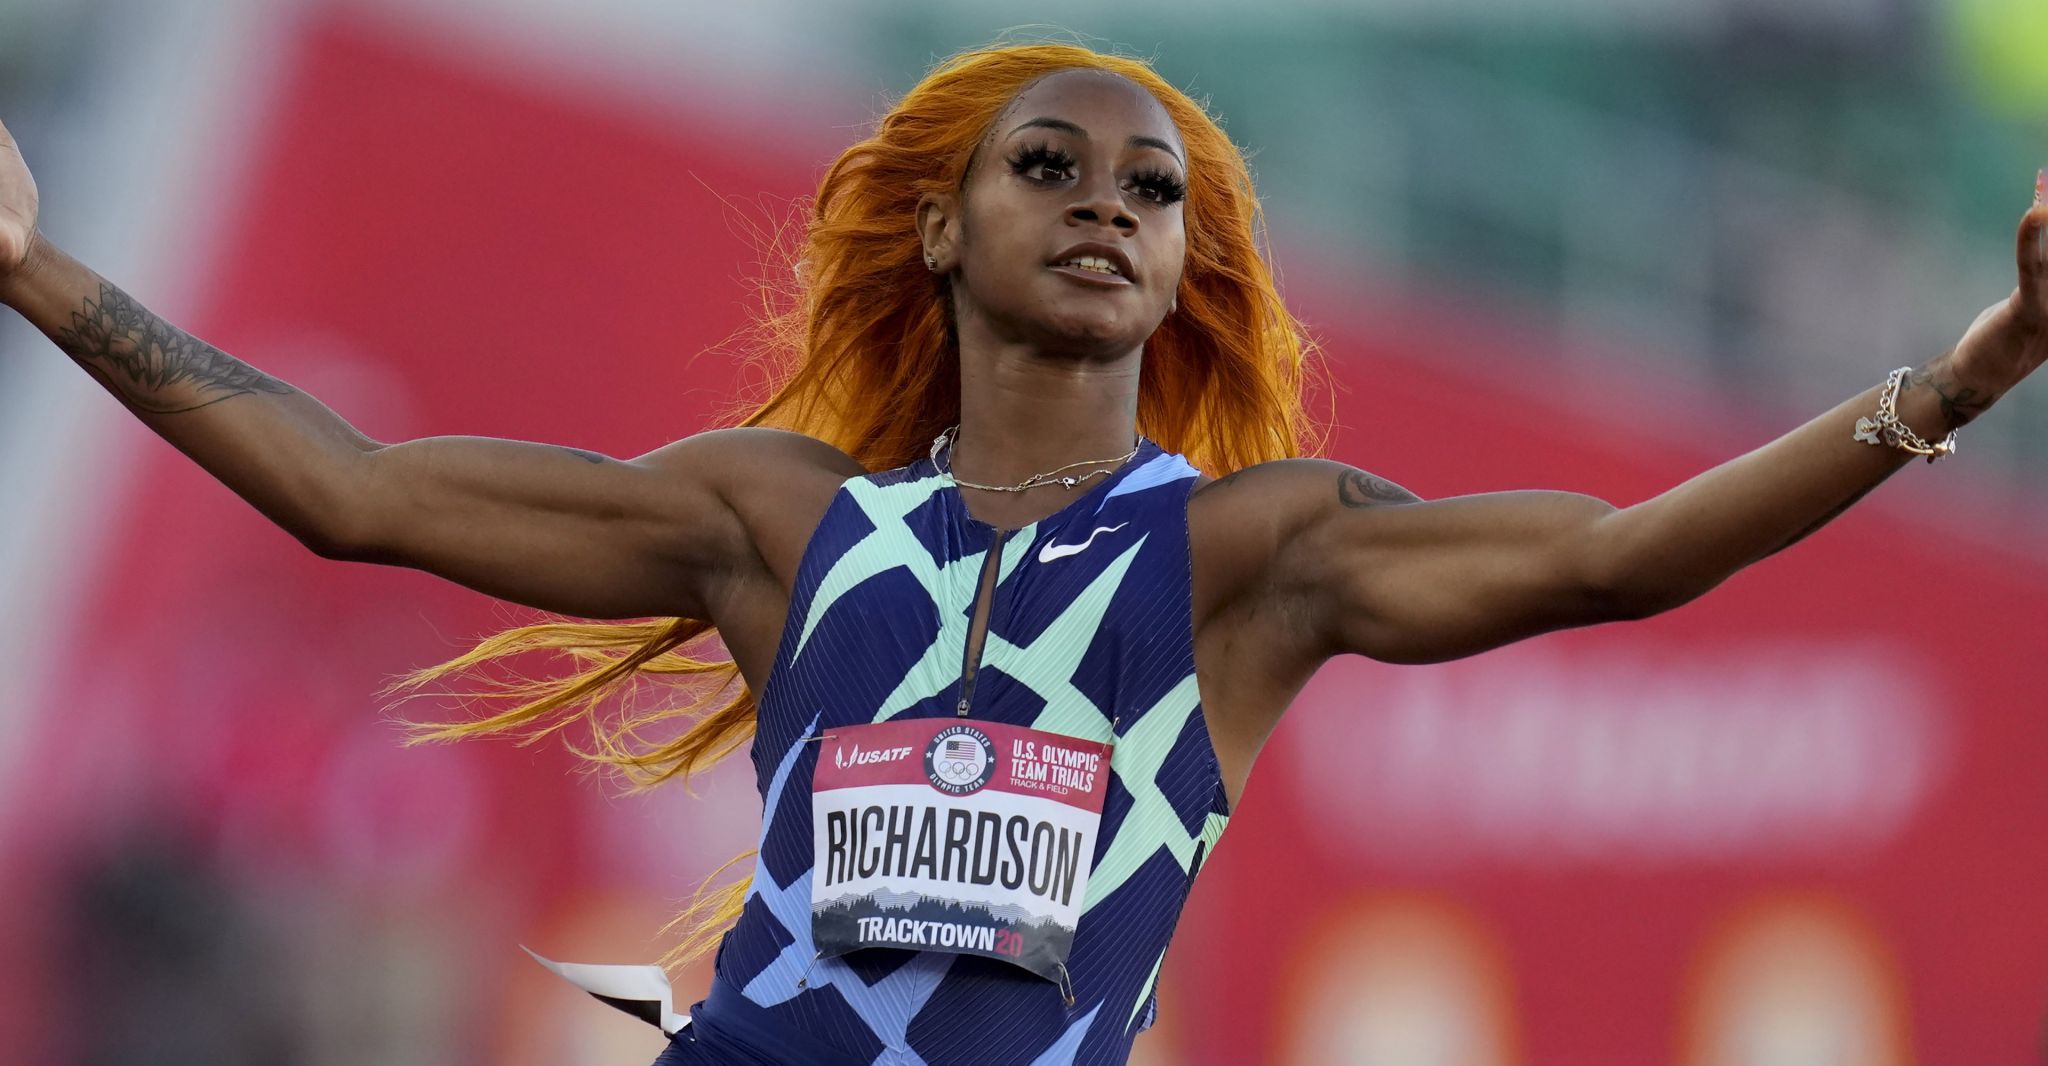 Texas Sprinter Shacarri Richardson Receives Outpouring Of Support After Failed Drug Test 